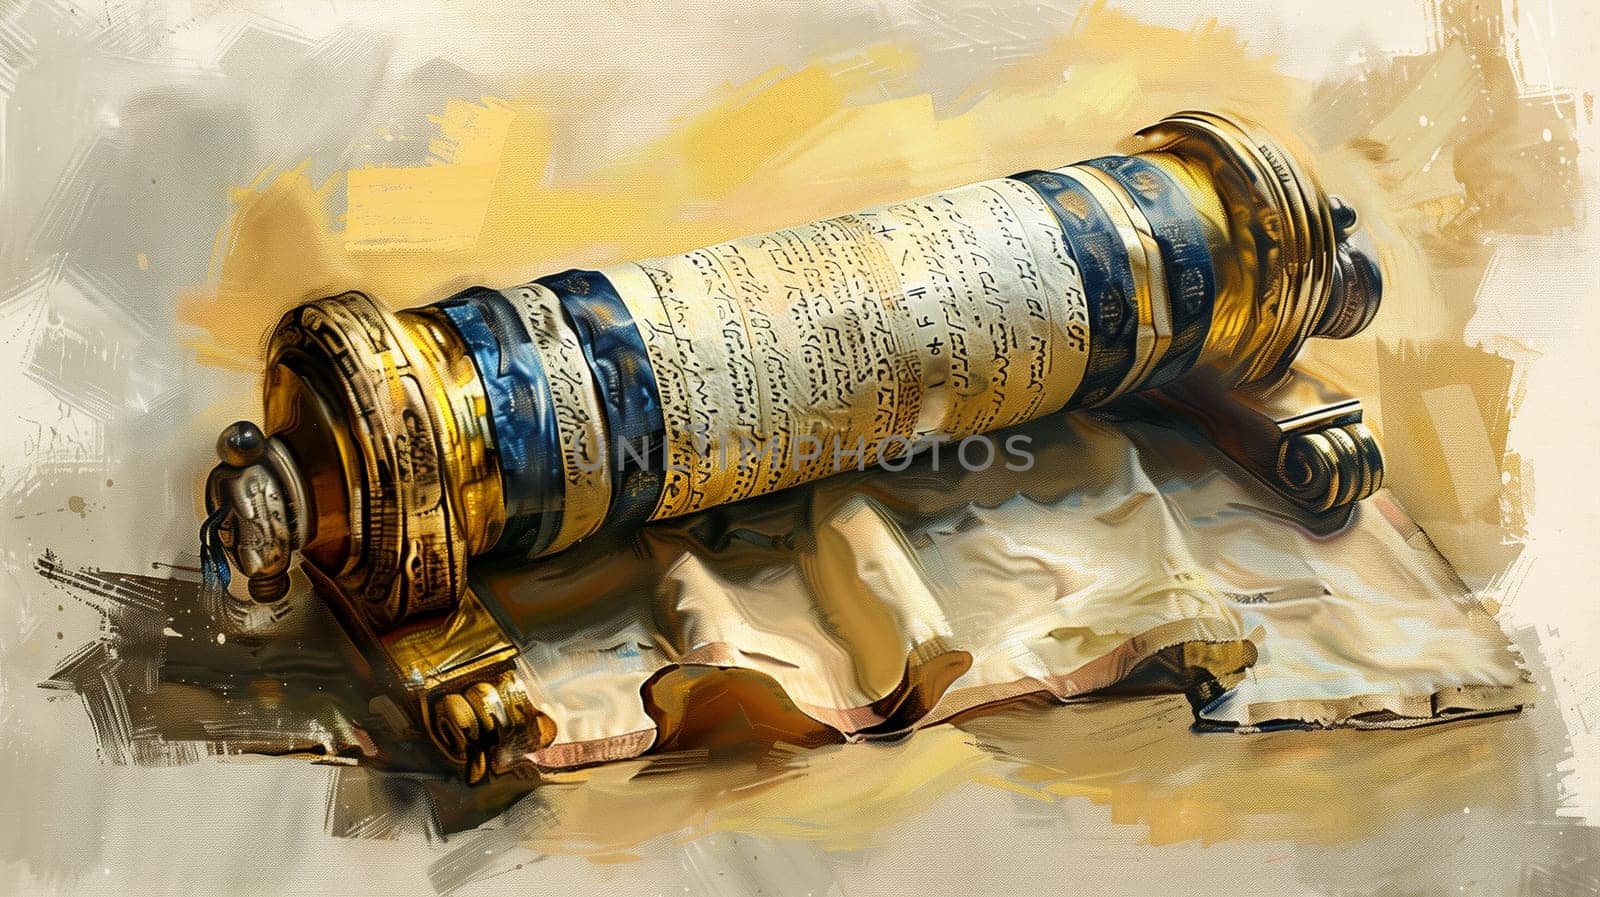 An illustrated Torah scroll, symbolic of Shavuot, adorned with rich detail and set against a festive background.